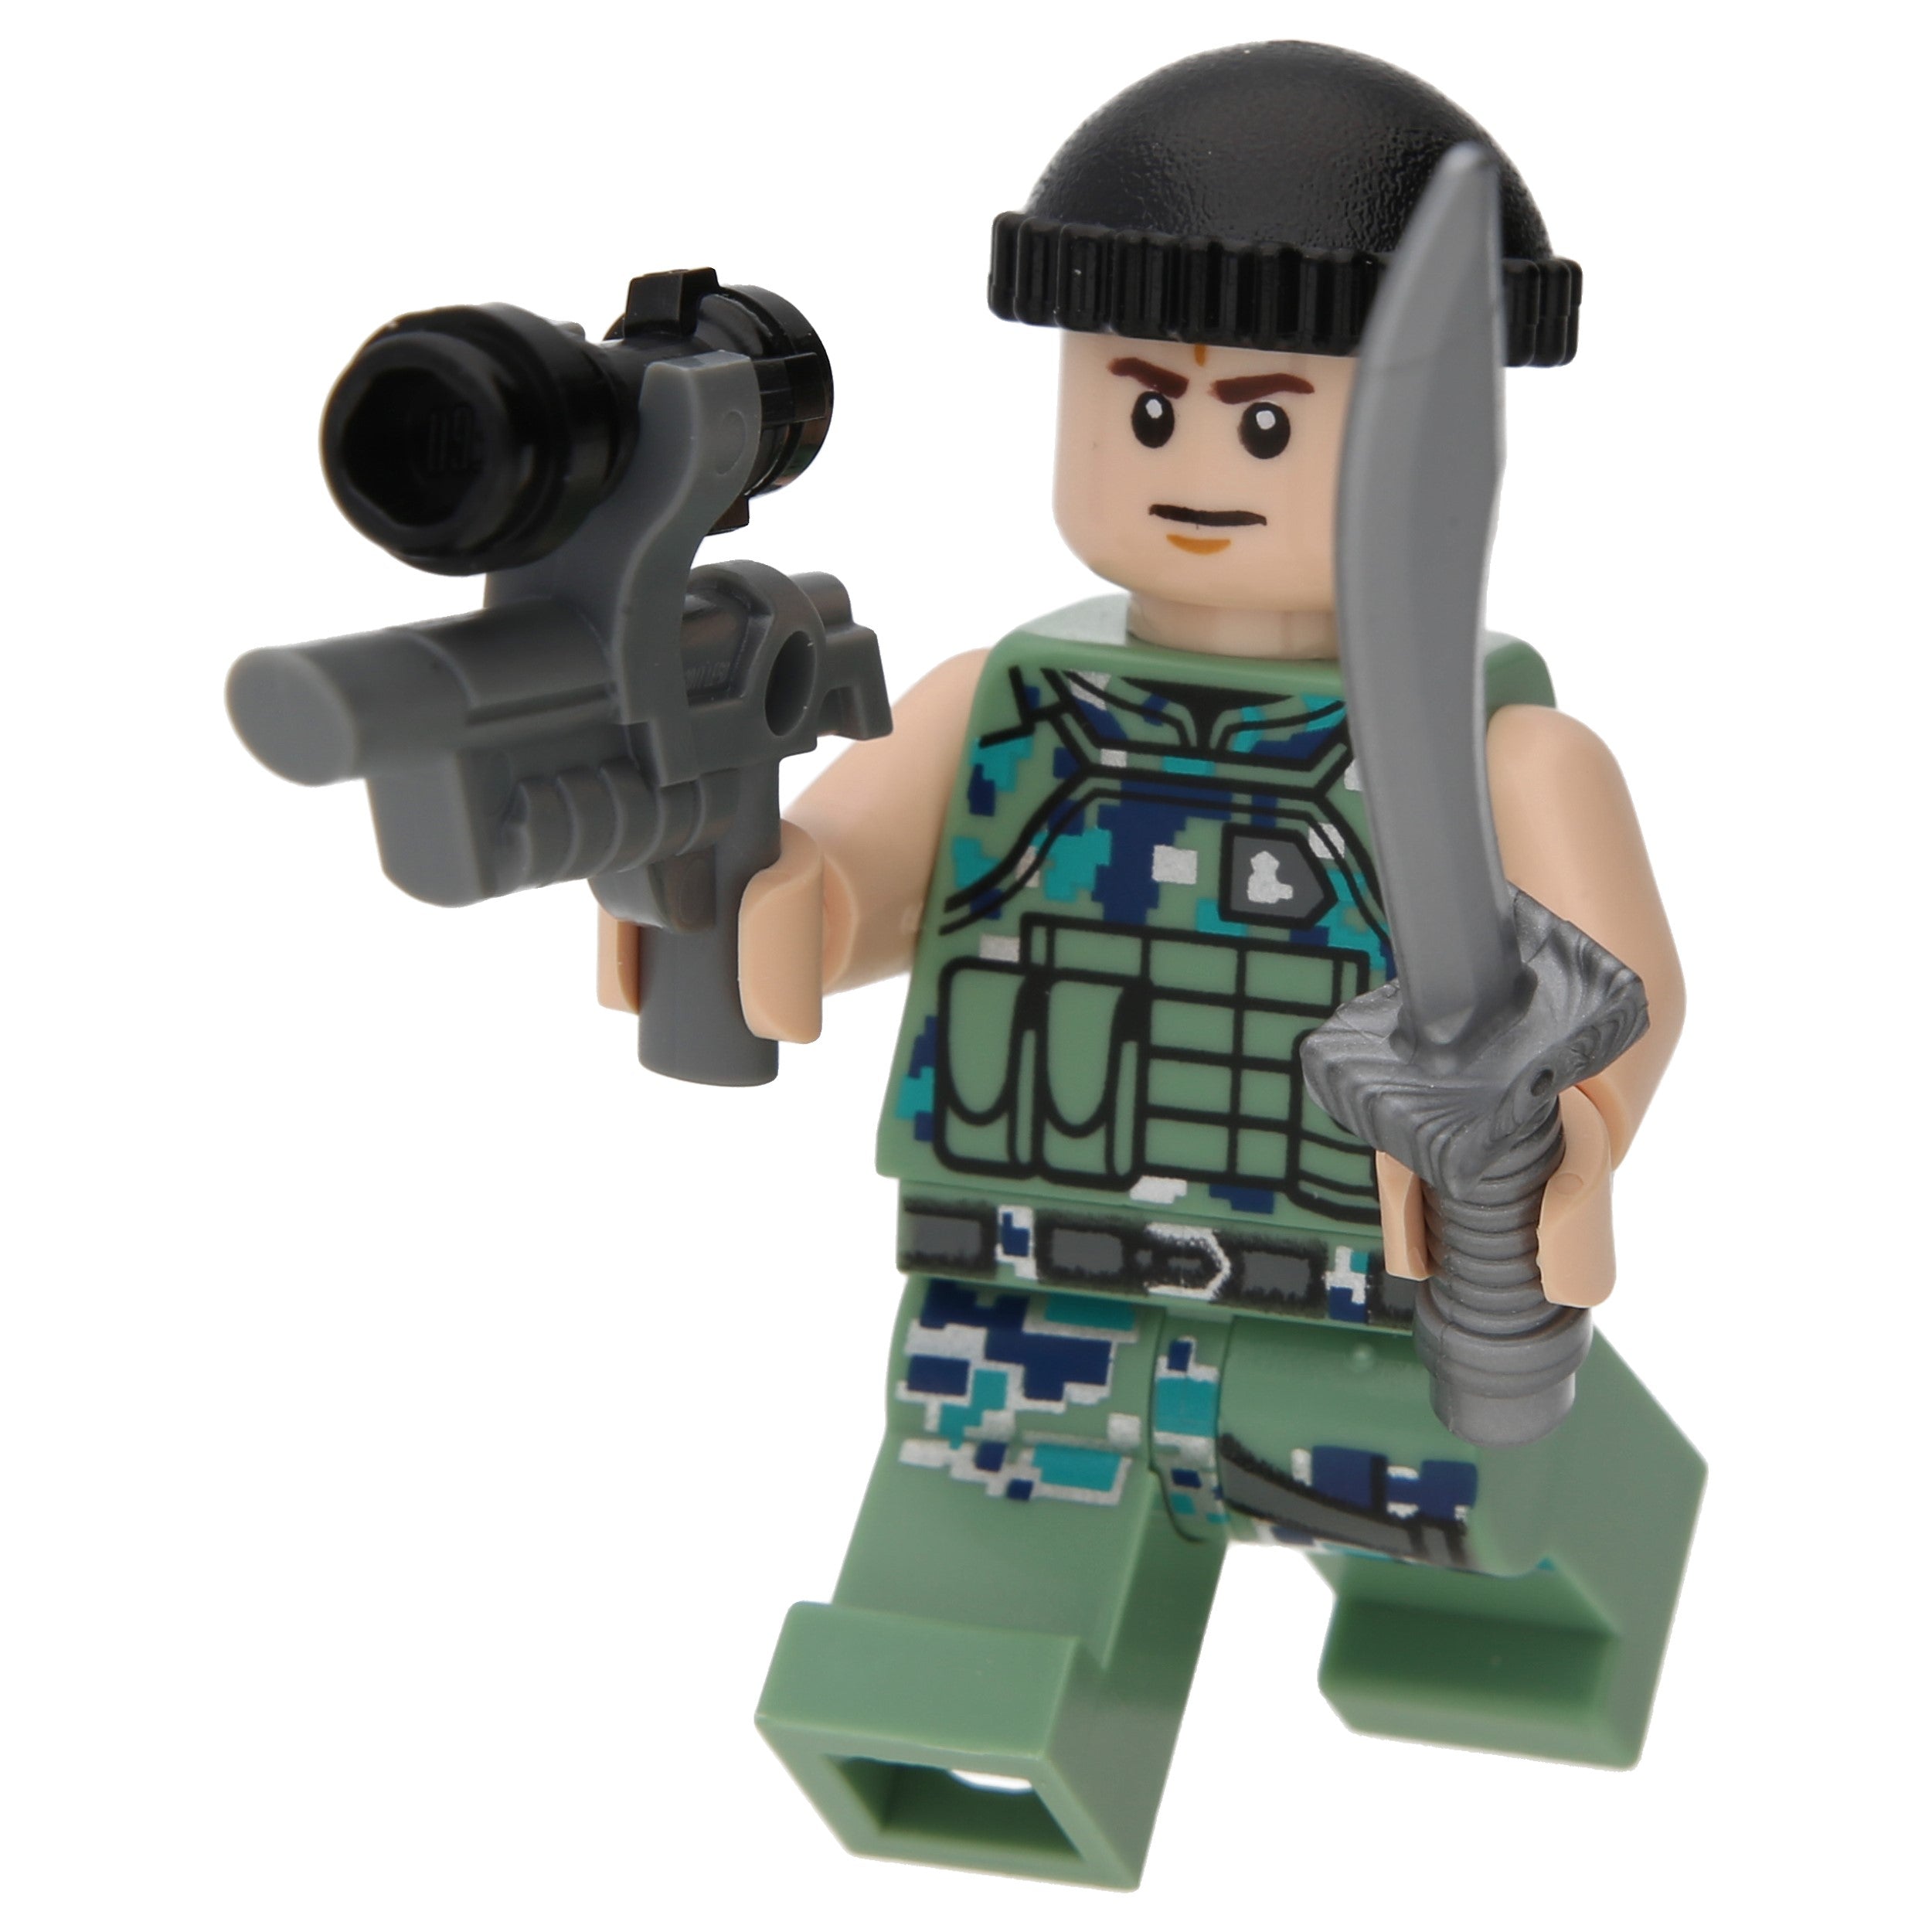 LEGO AVATAR Minifigures - RDA crabs suit pilot with weapon - AVT017 - Avatar: The Way of Water